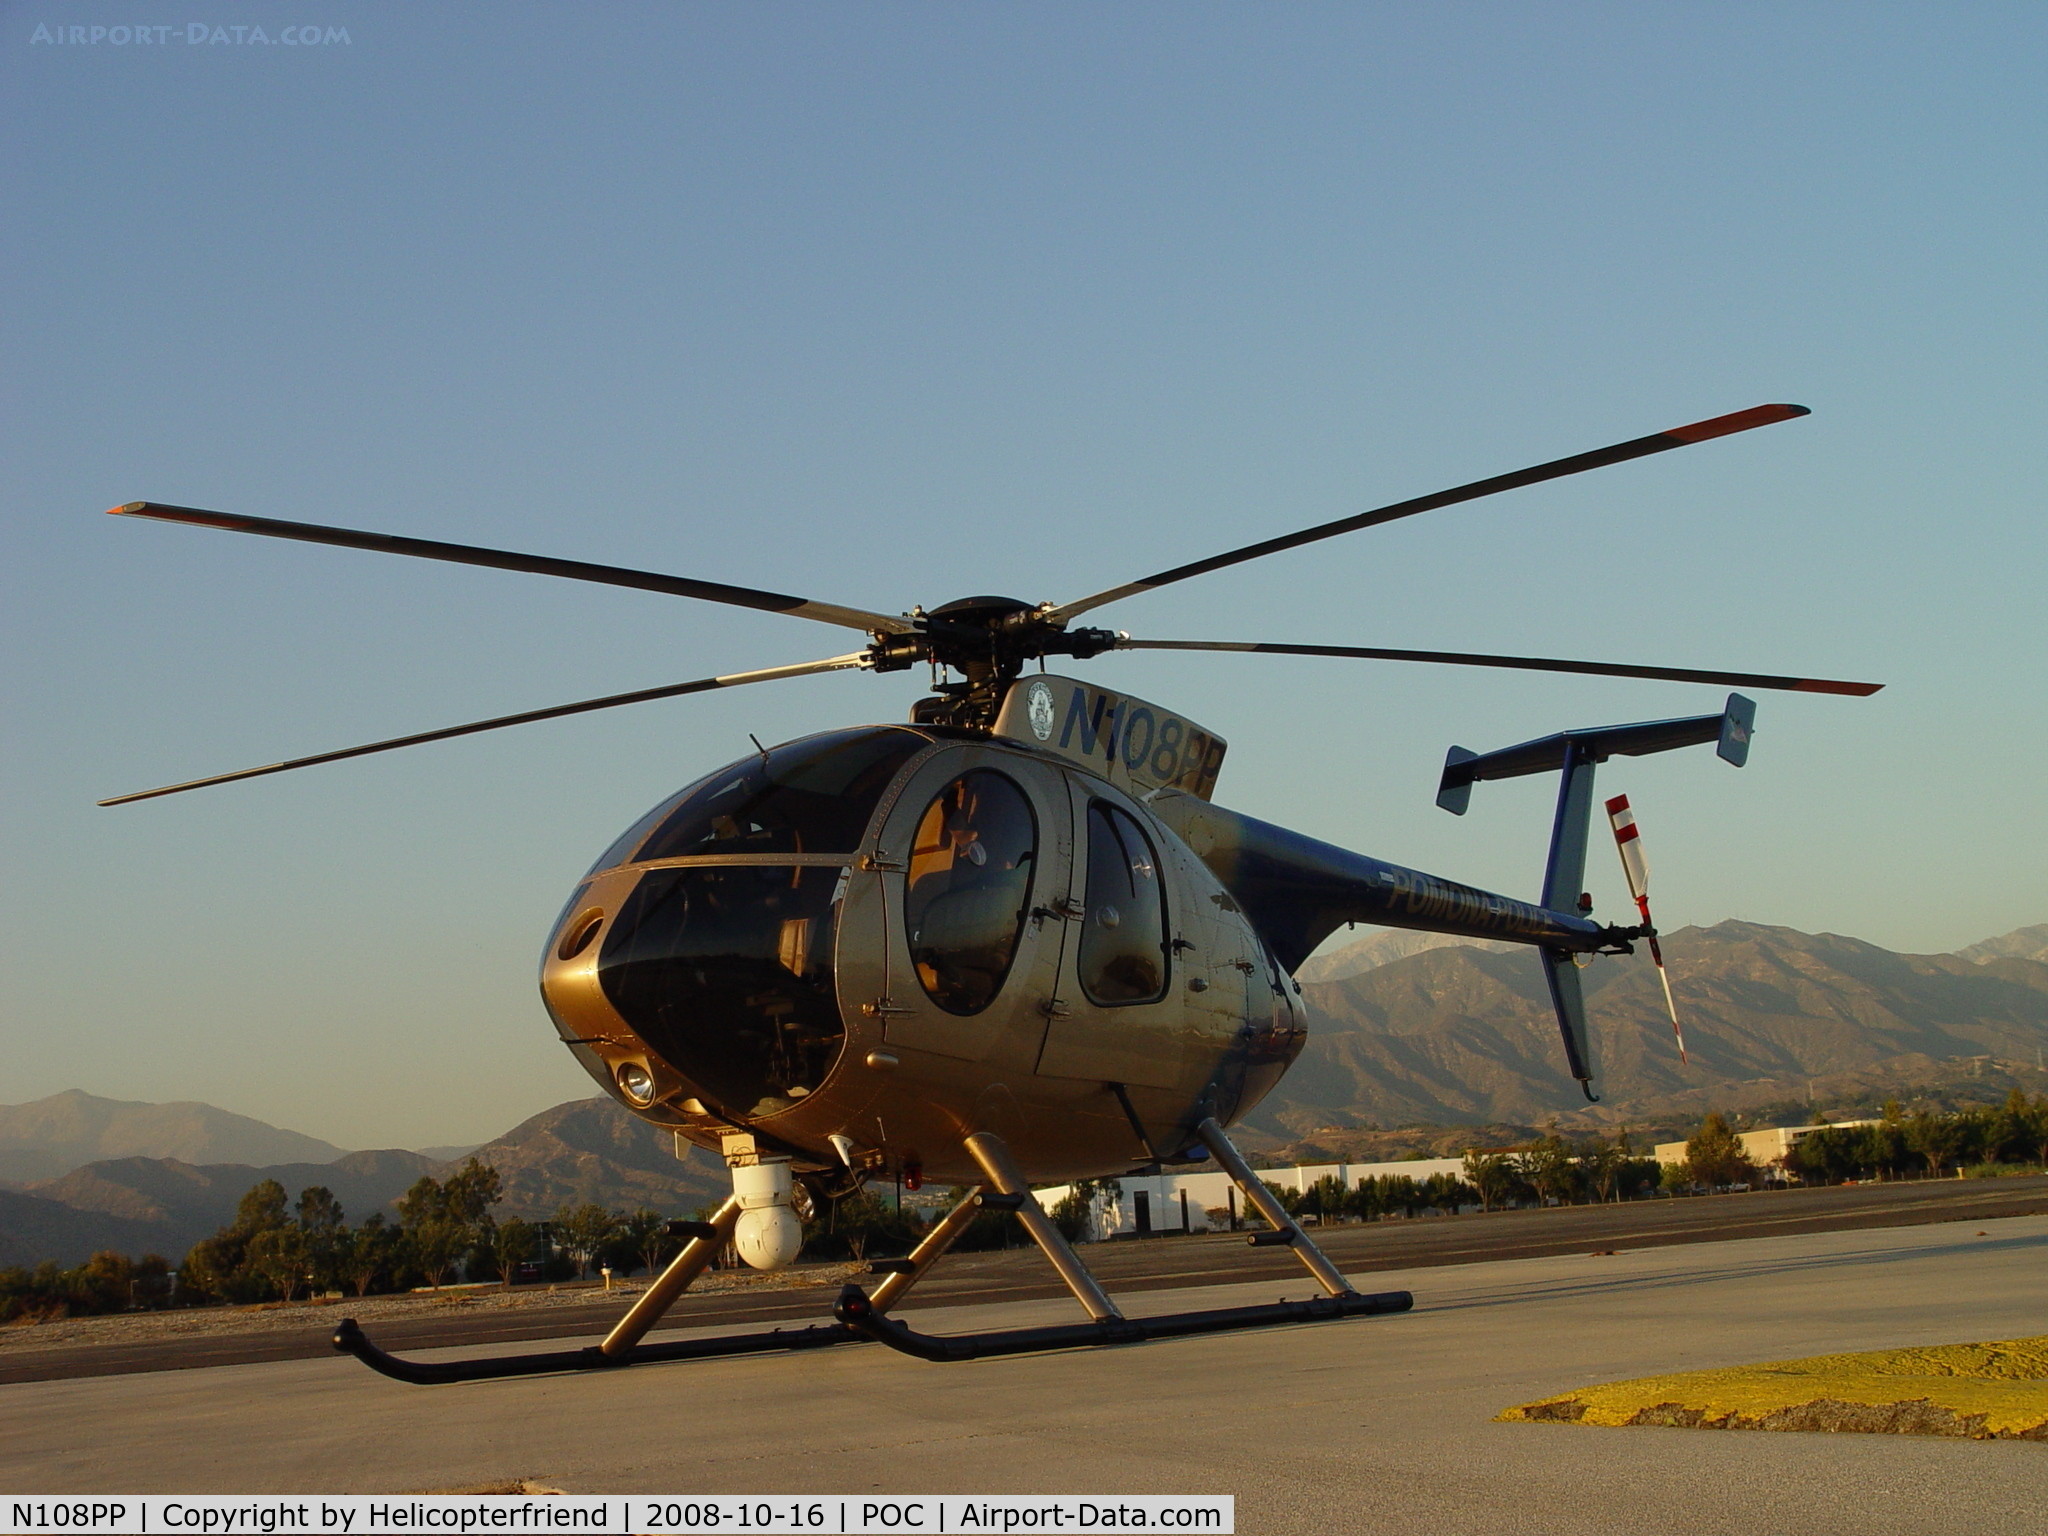 N108PP, 2008 MD Helicopters 369E C/N 0578E, Waiting during 100 hr inspection at Brackett PPD Pad